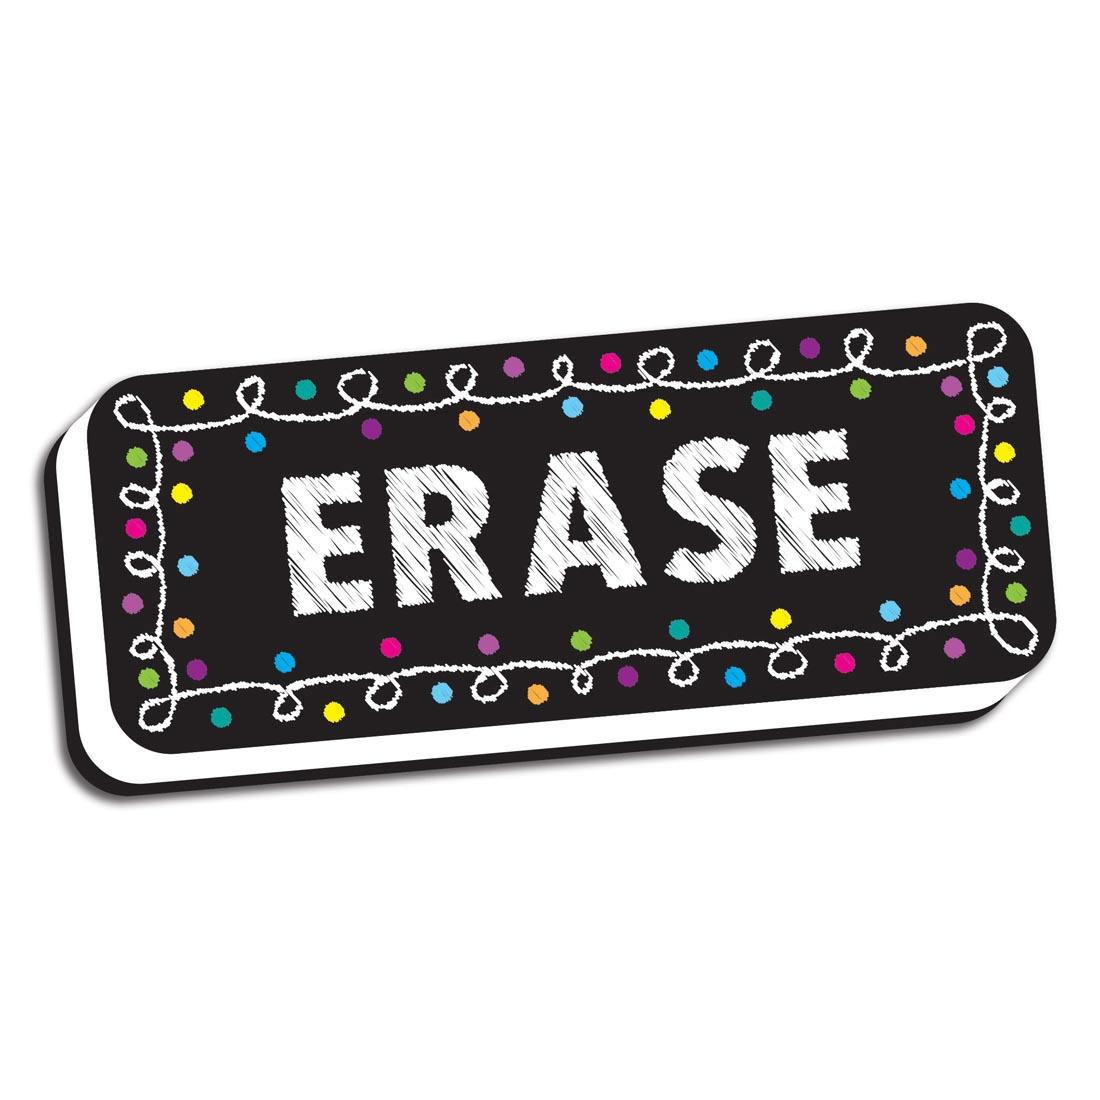 Chalk Loops Magnetic Whiteboard Eraser by Ashley has the word Erase on it